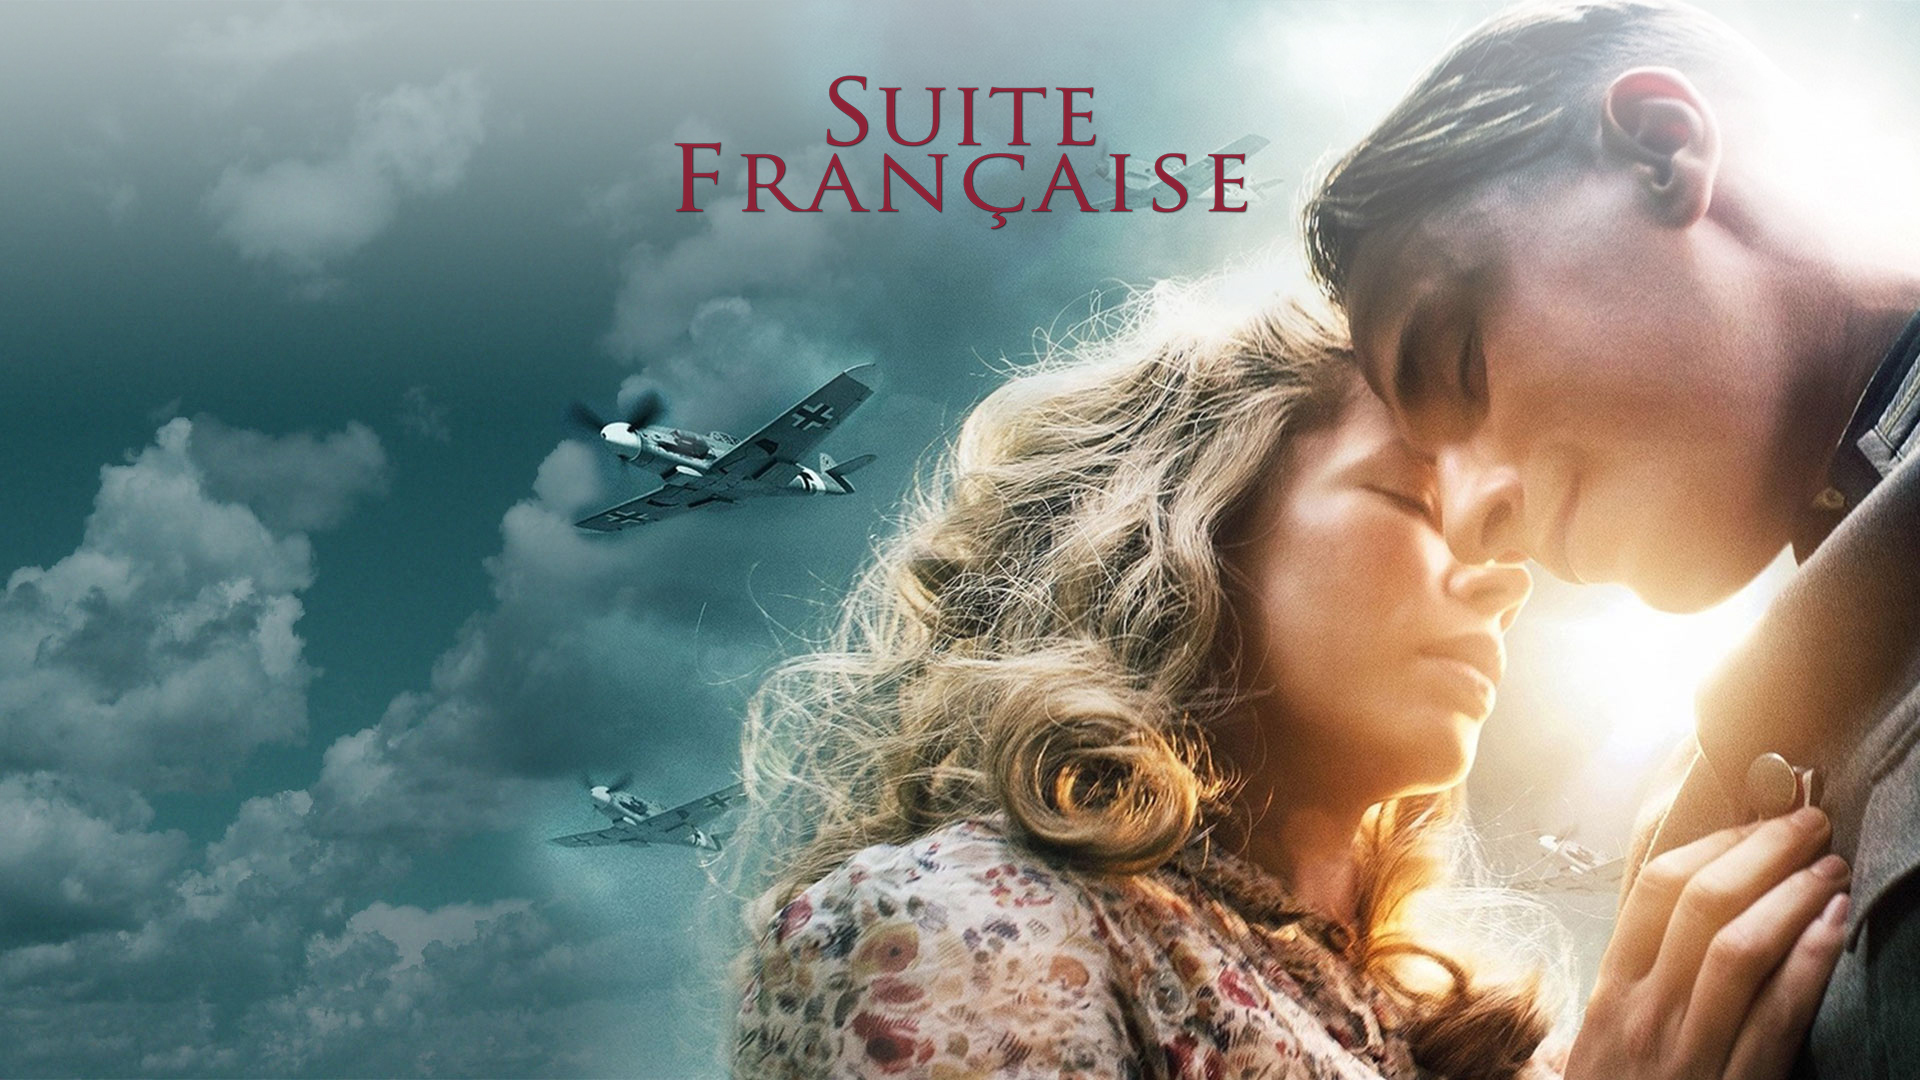 cory byrne recommends suite francaise english subtitles pic